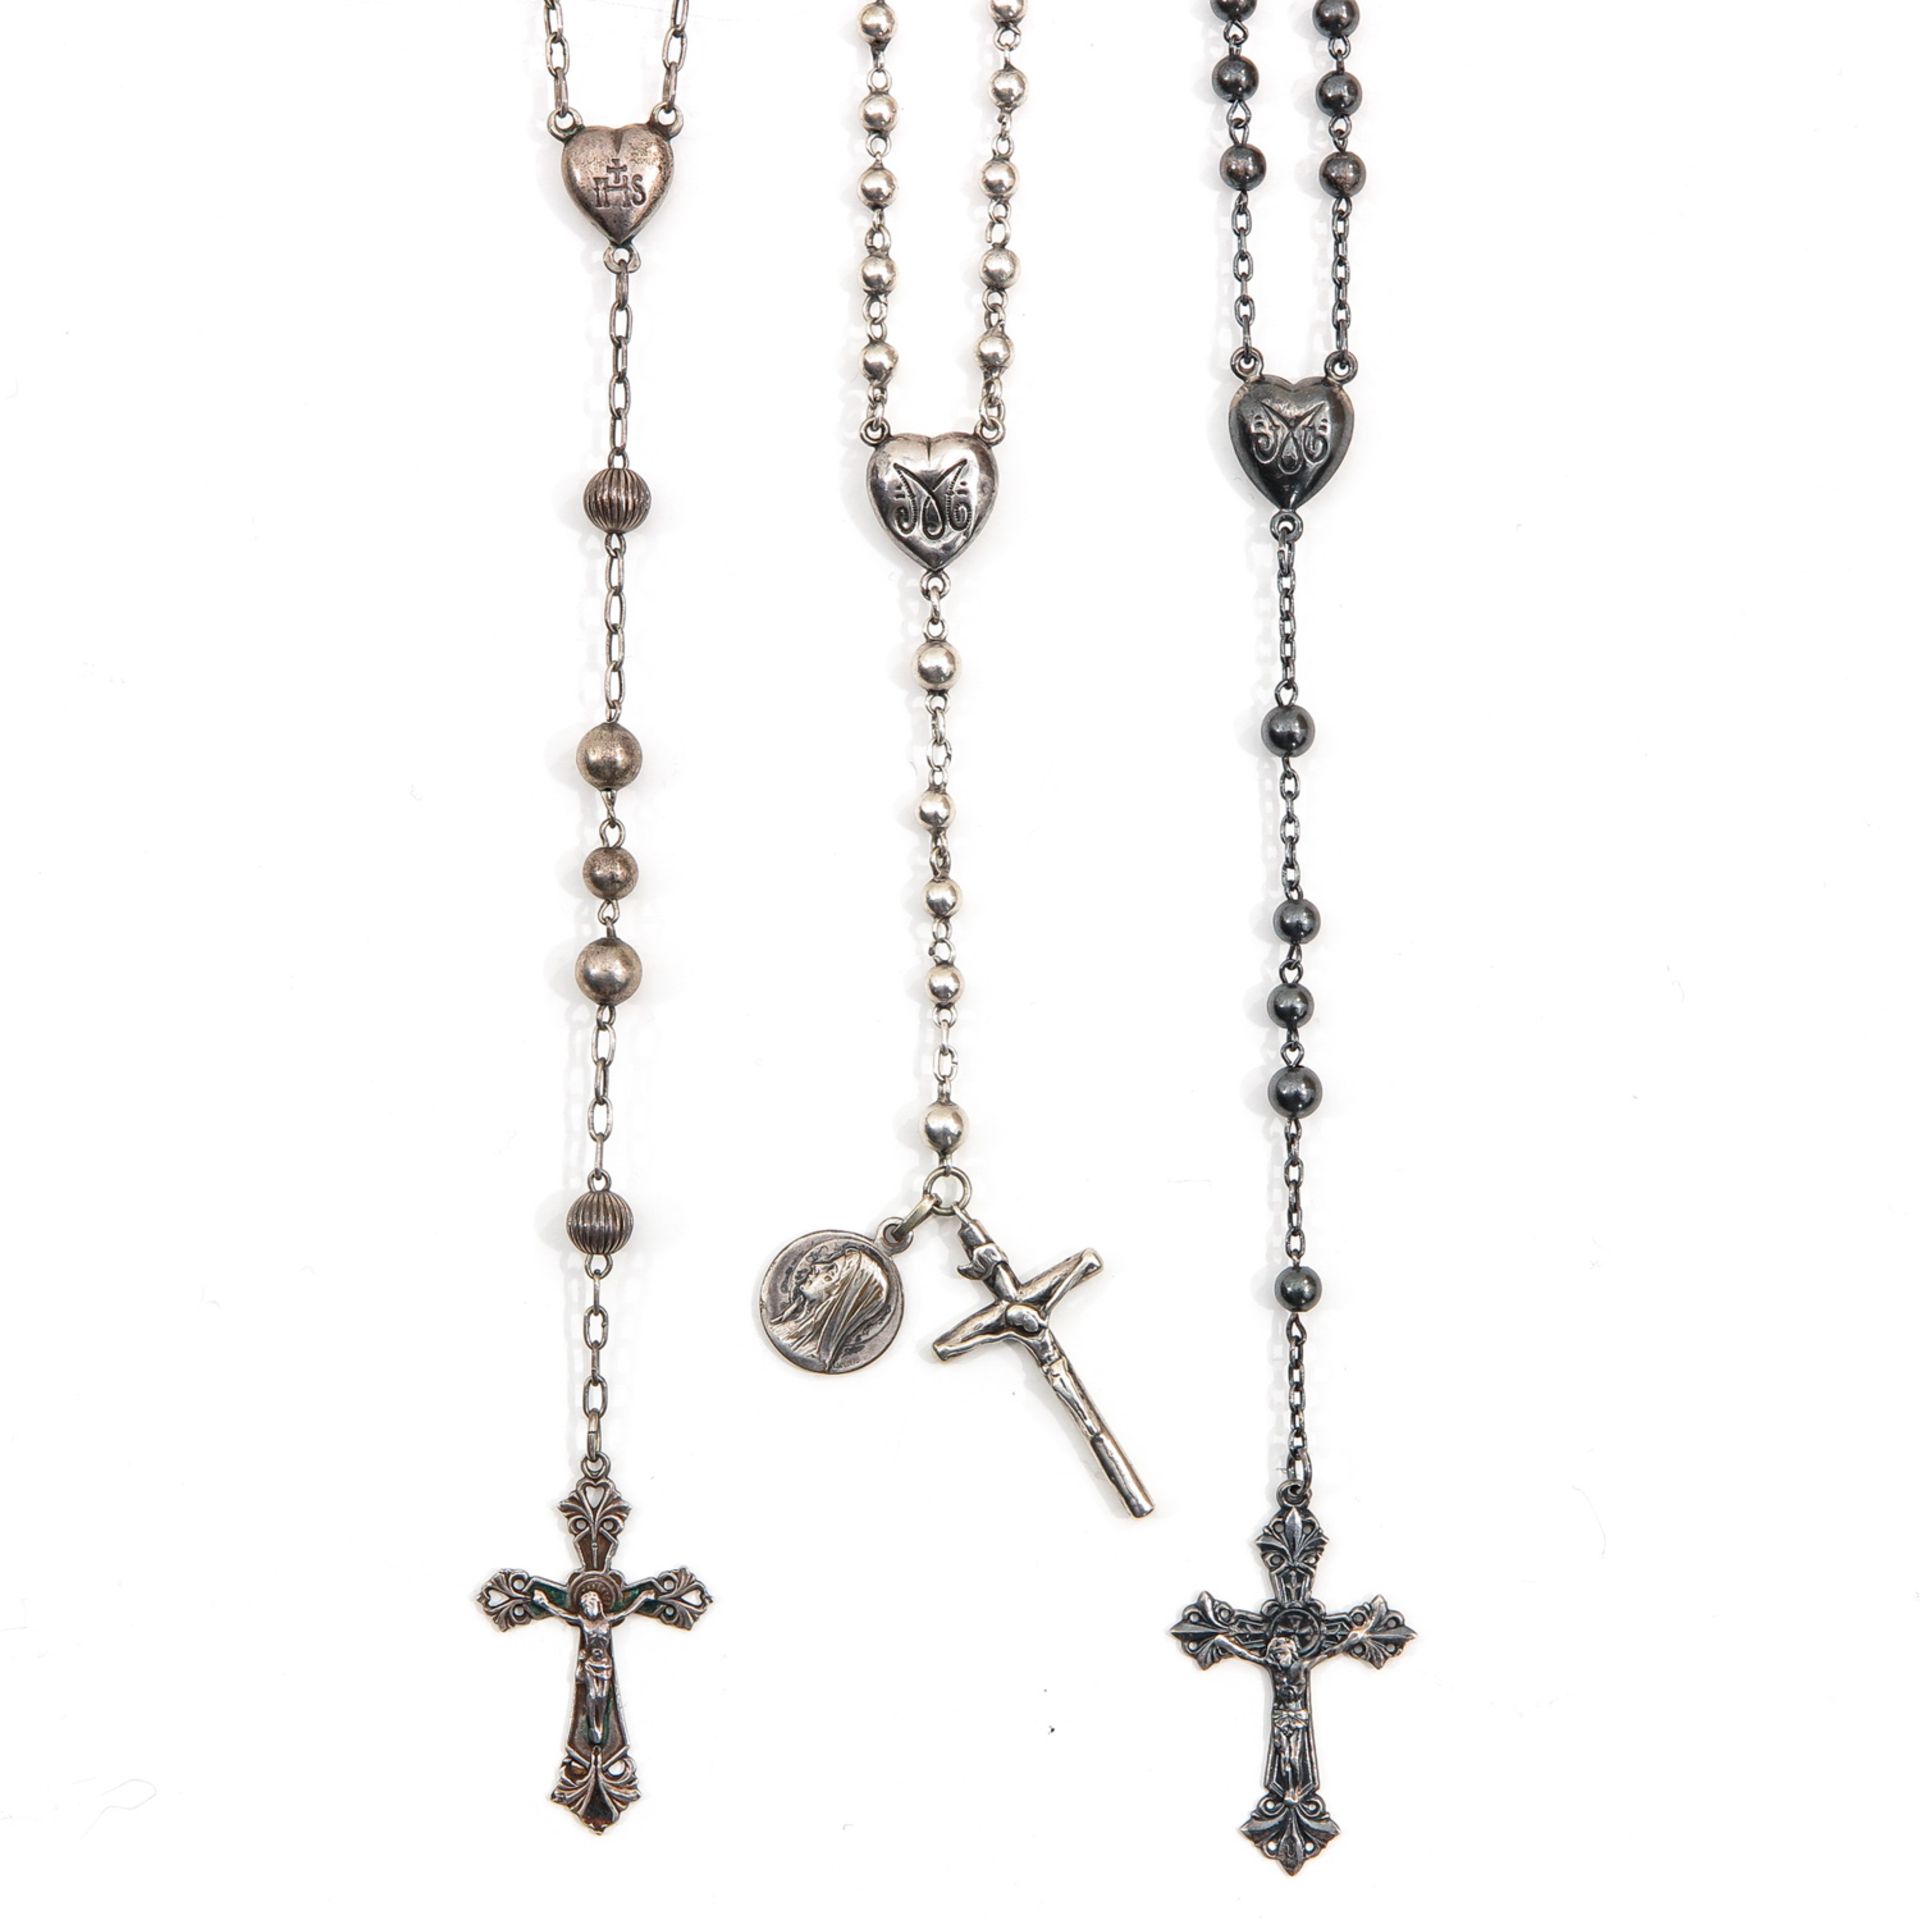 A Collection of 7 Silver Rosaries - Image 3 of 5